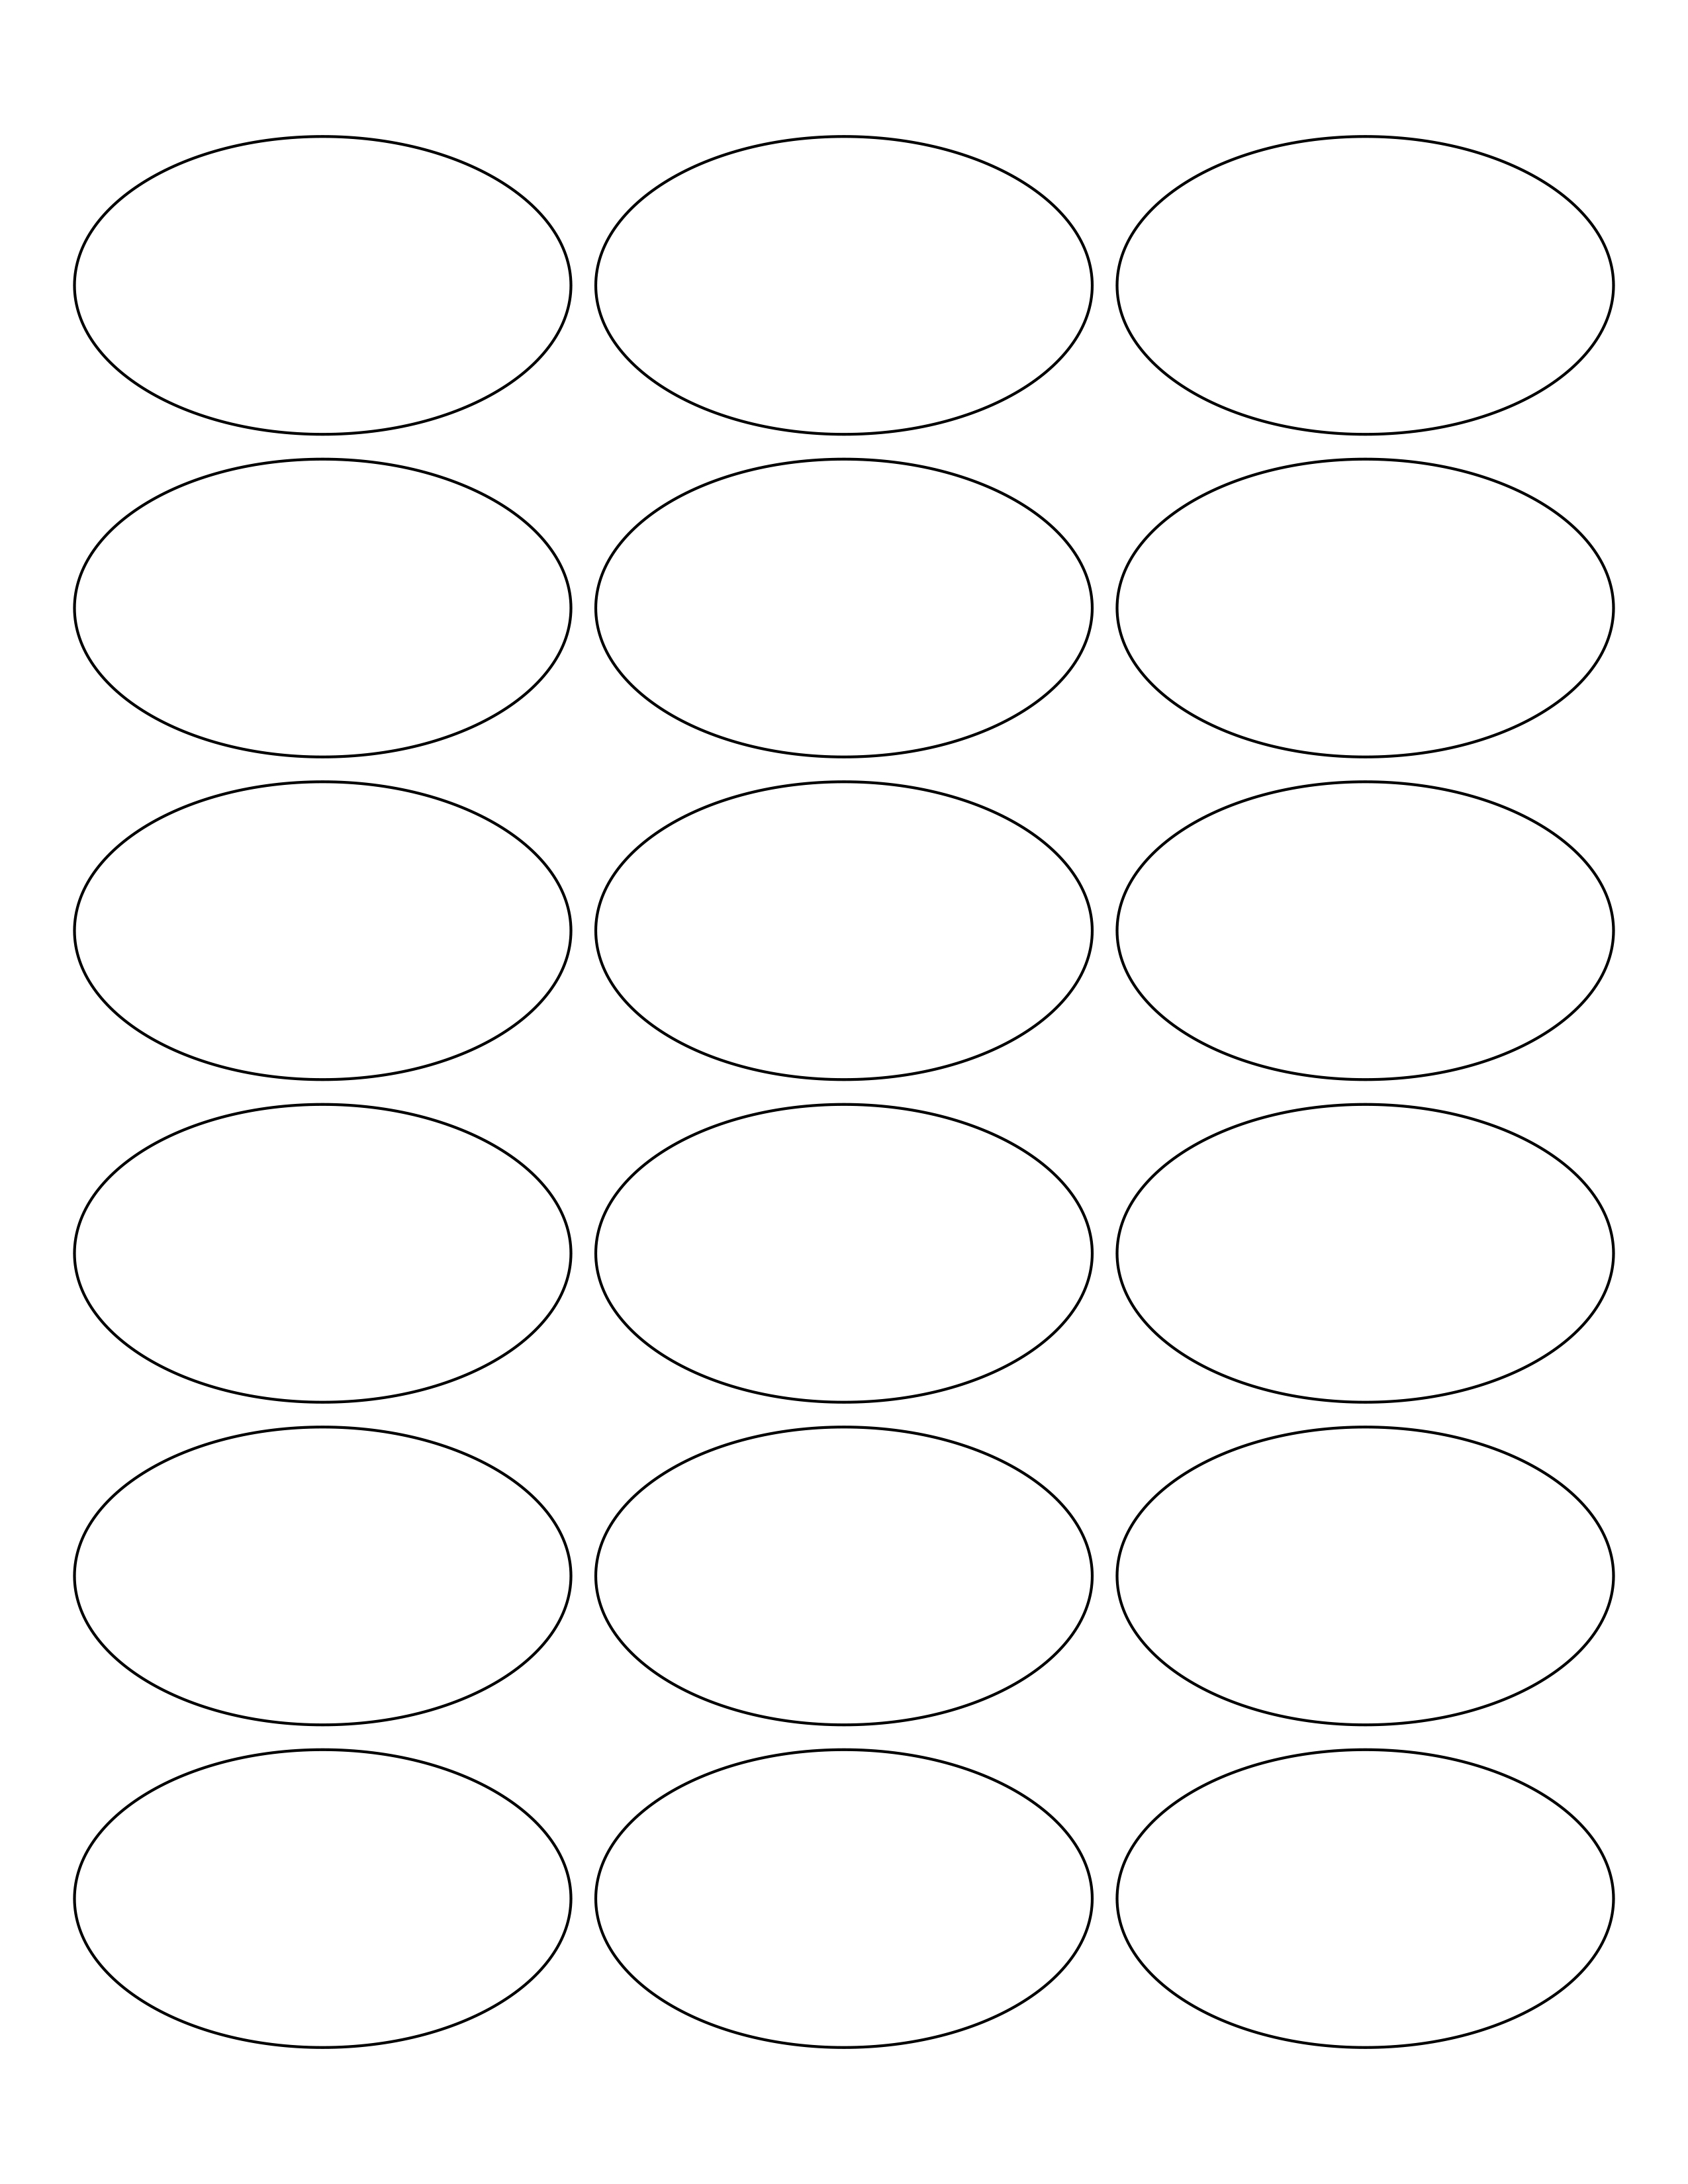 MR200 – 200.200″ x 20.200″ – US Letter Sheet – 2008 Oval Labels – MR-LABEL Intended For 1.5 Circle Label Template